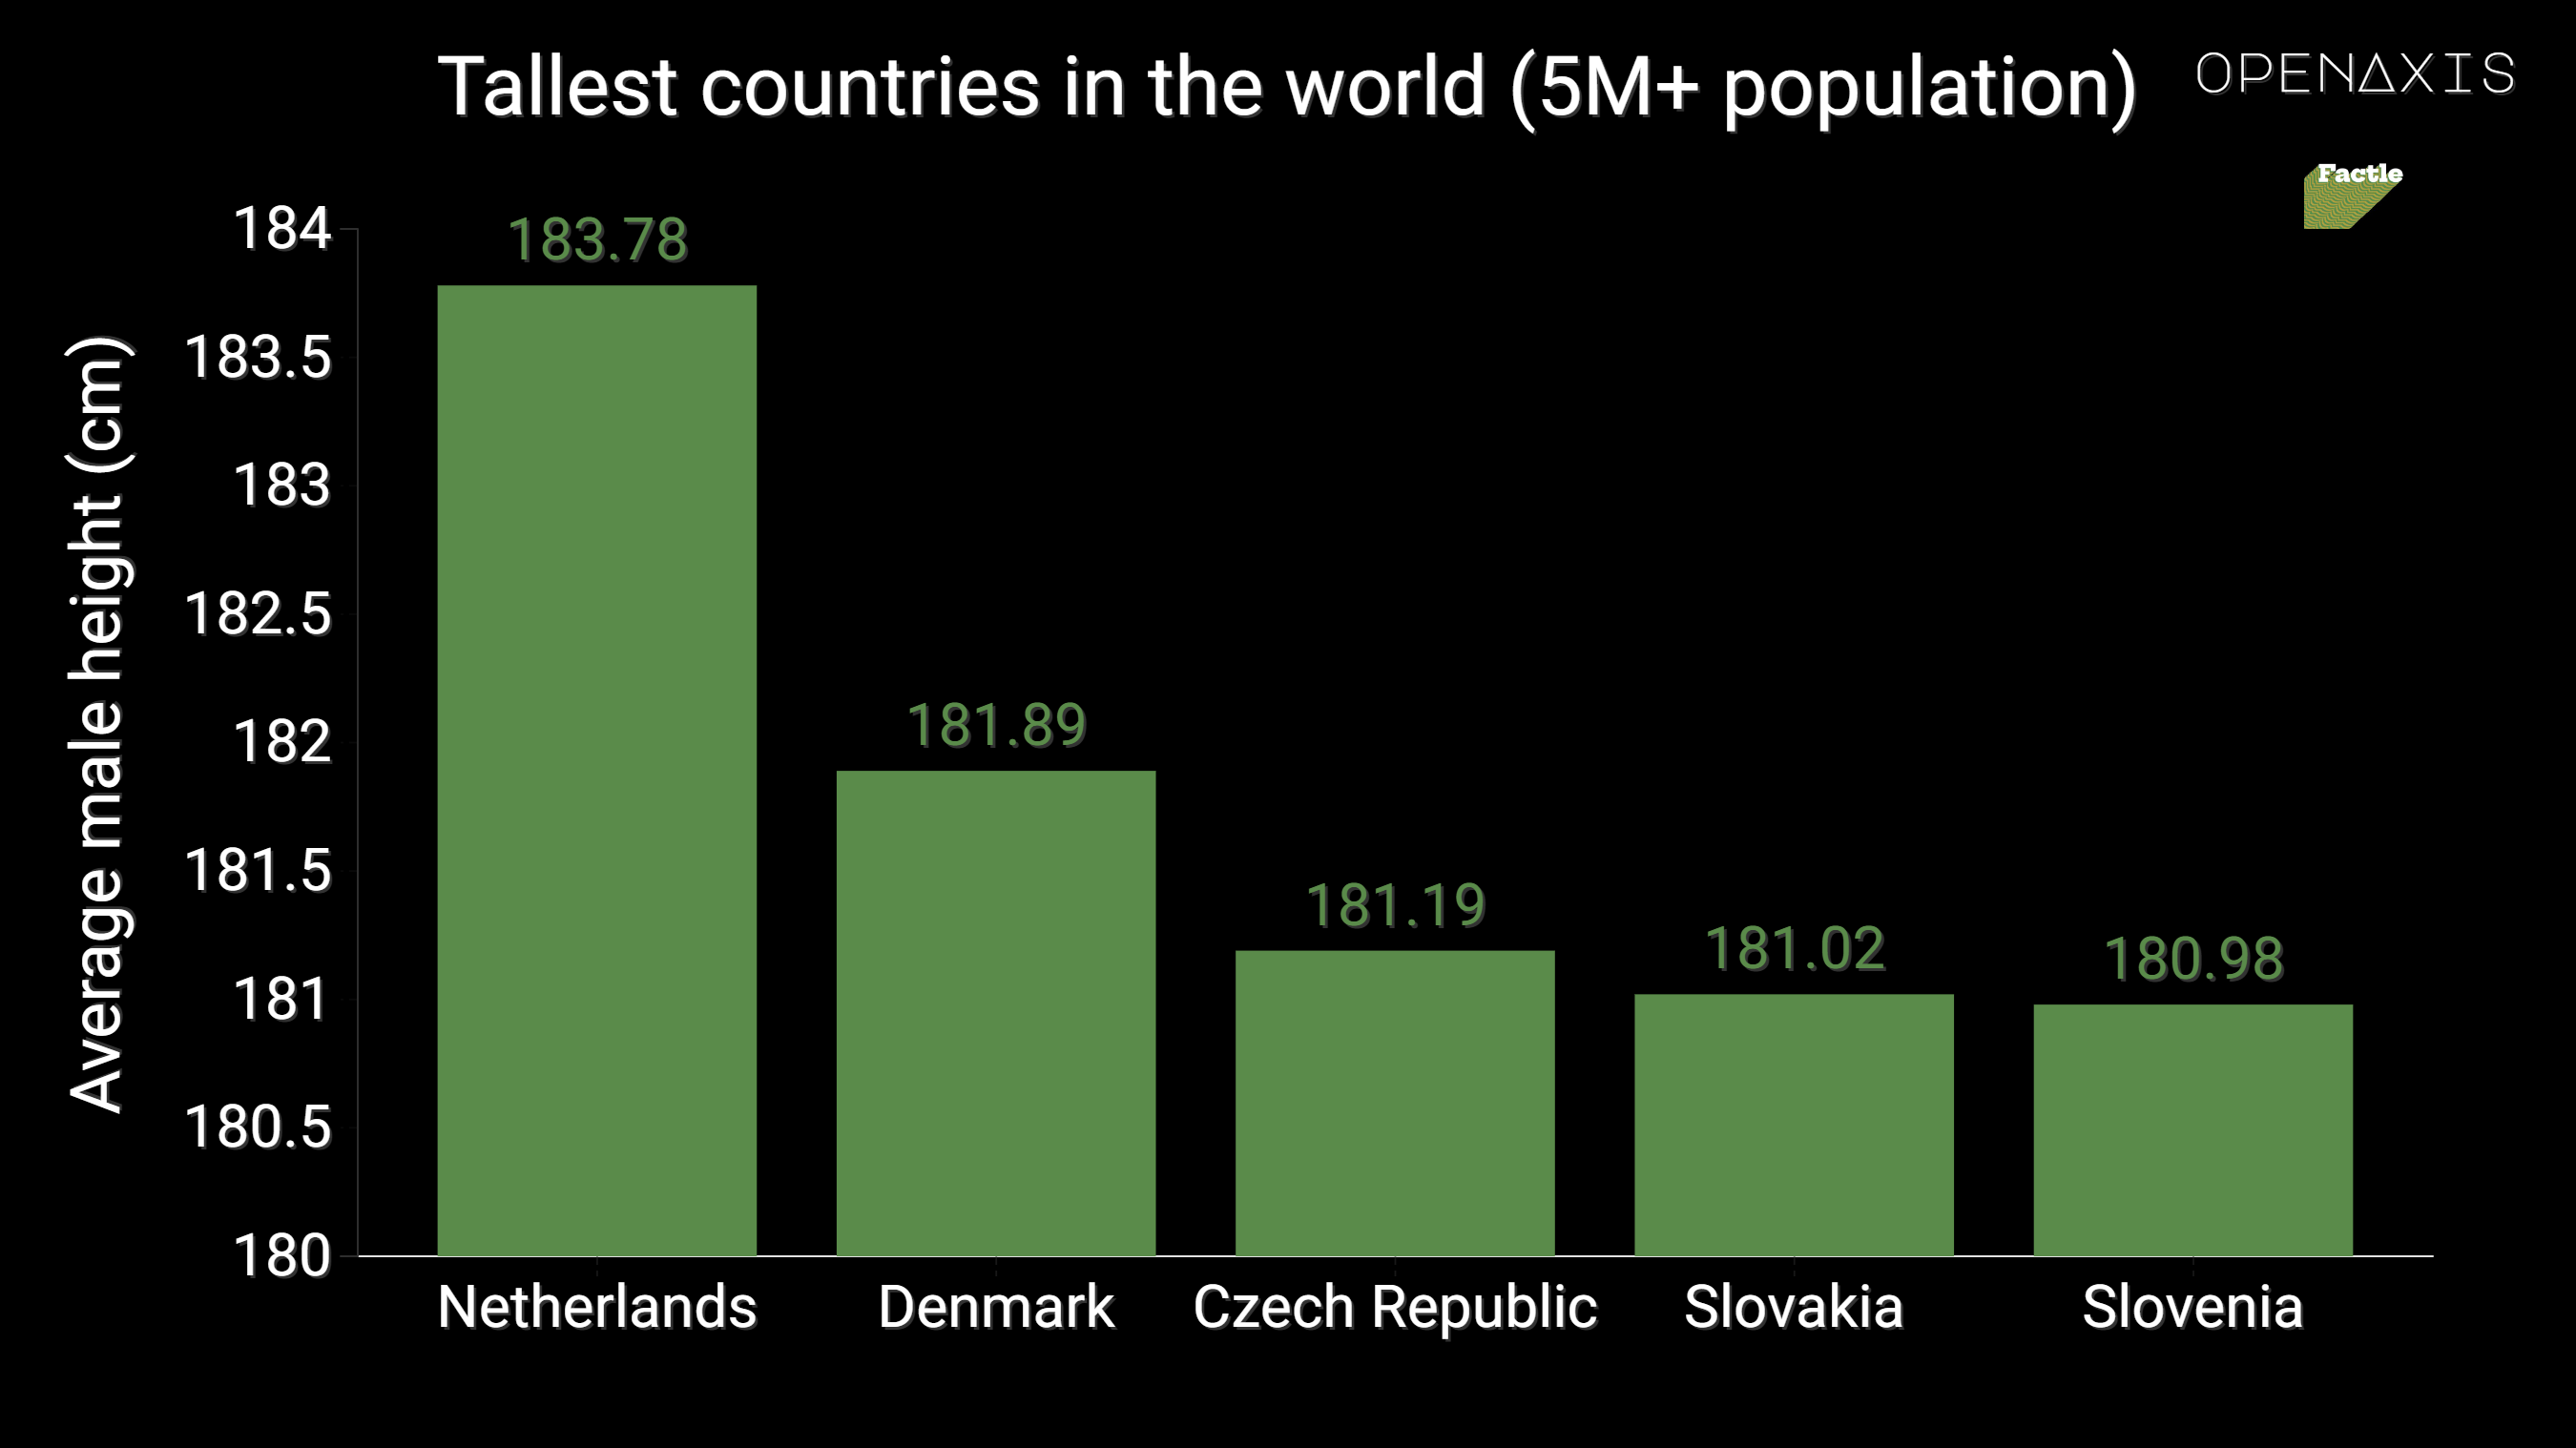 "Tallest countries in the world (5M+ population)"